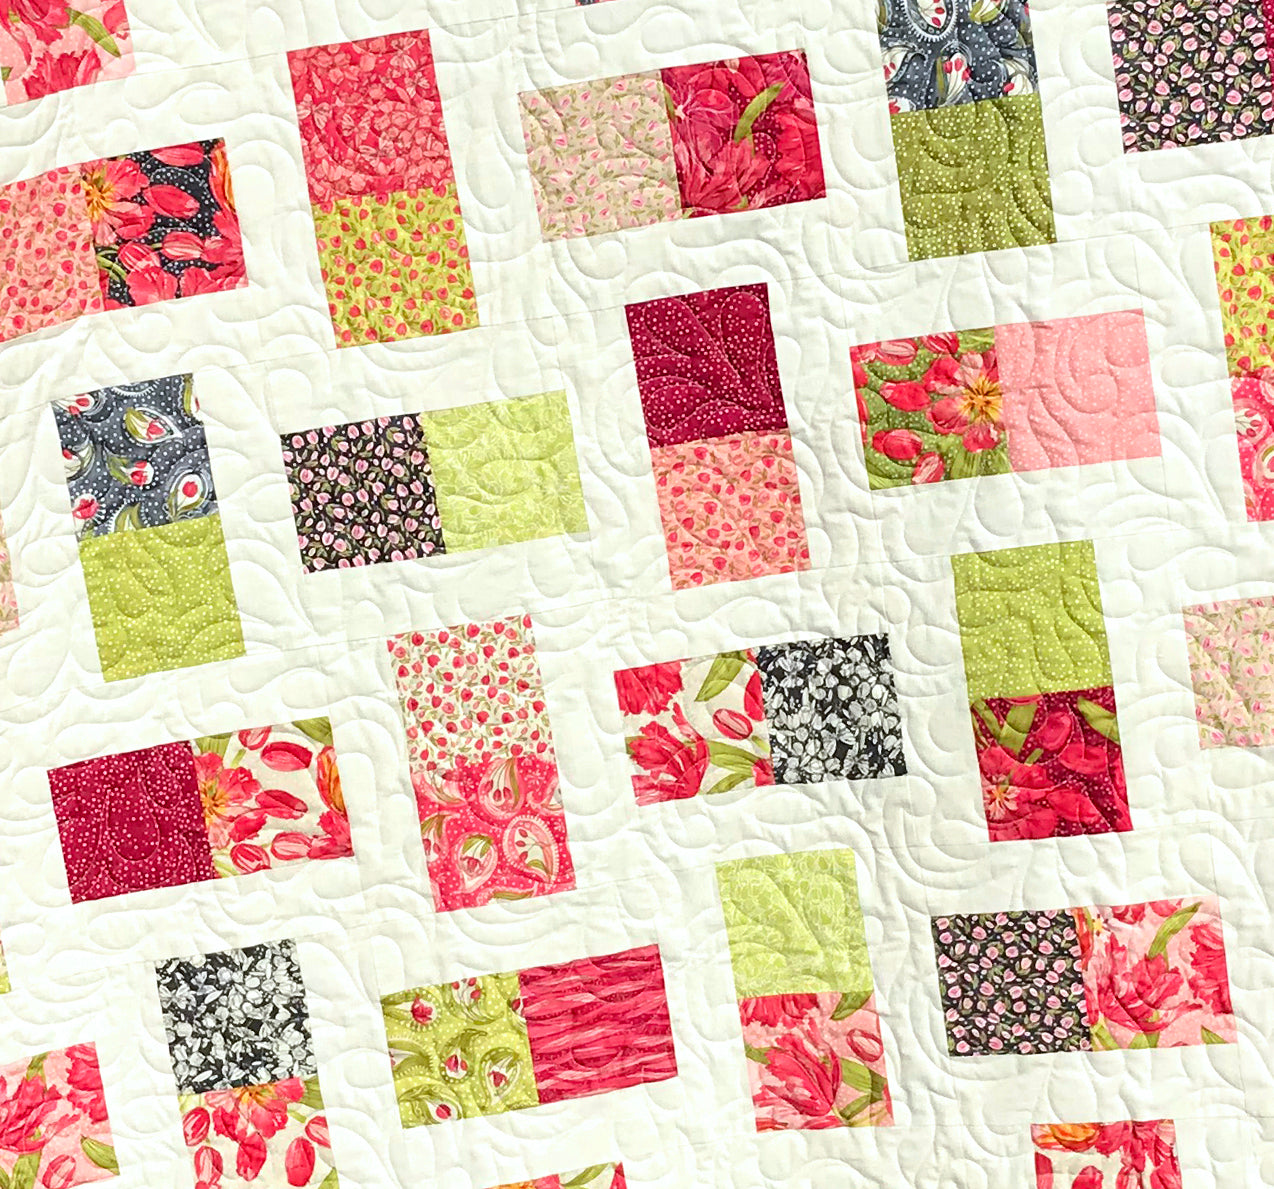 Hidden Charms Quilt Pattern for Charm Squares - Digital Quilt Pattern - Handmade Quilts, Digital Patterns, and Home Décor items online - Cuddle Cat Quiltworks